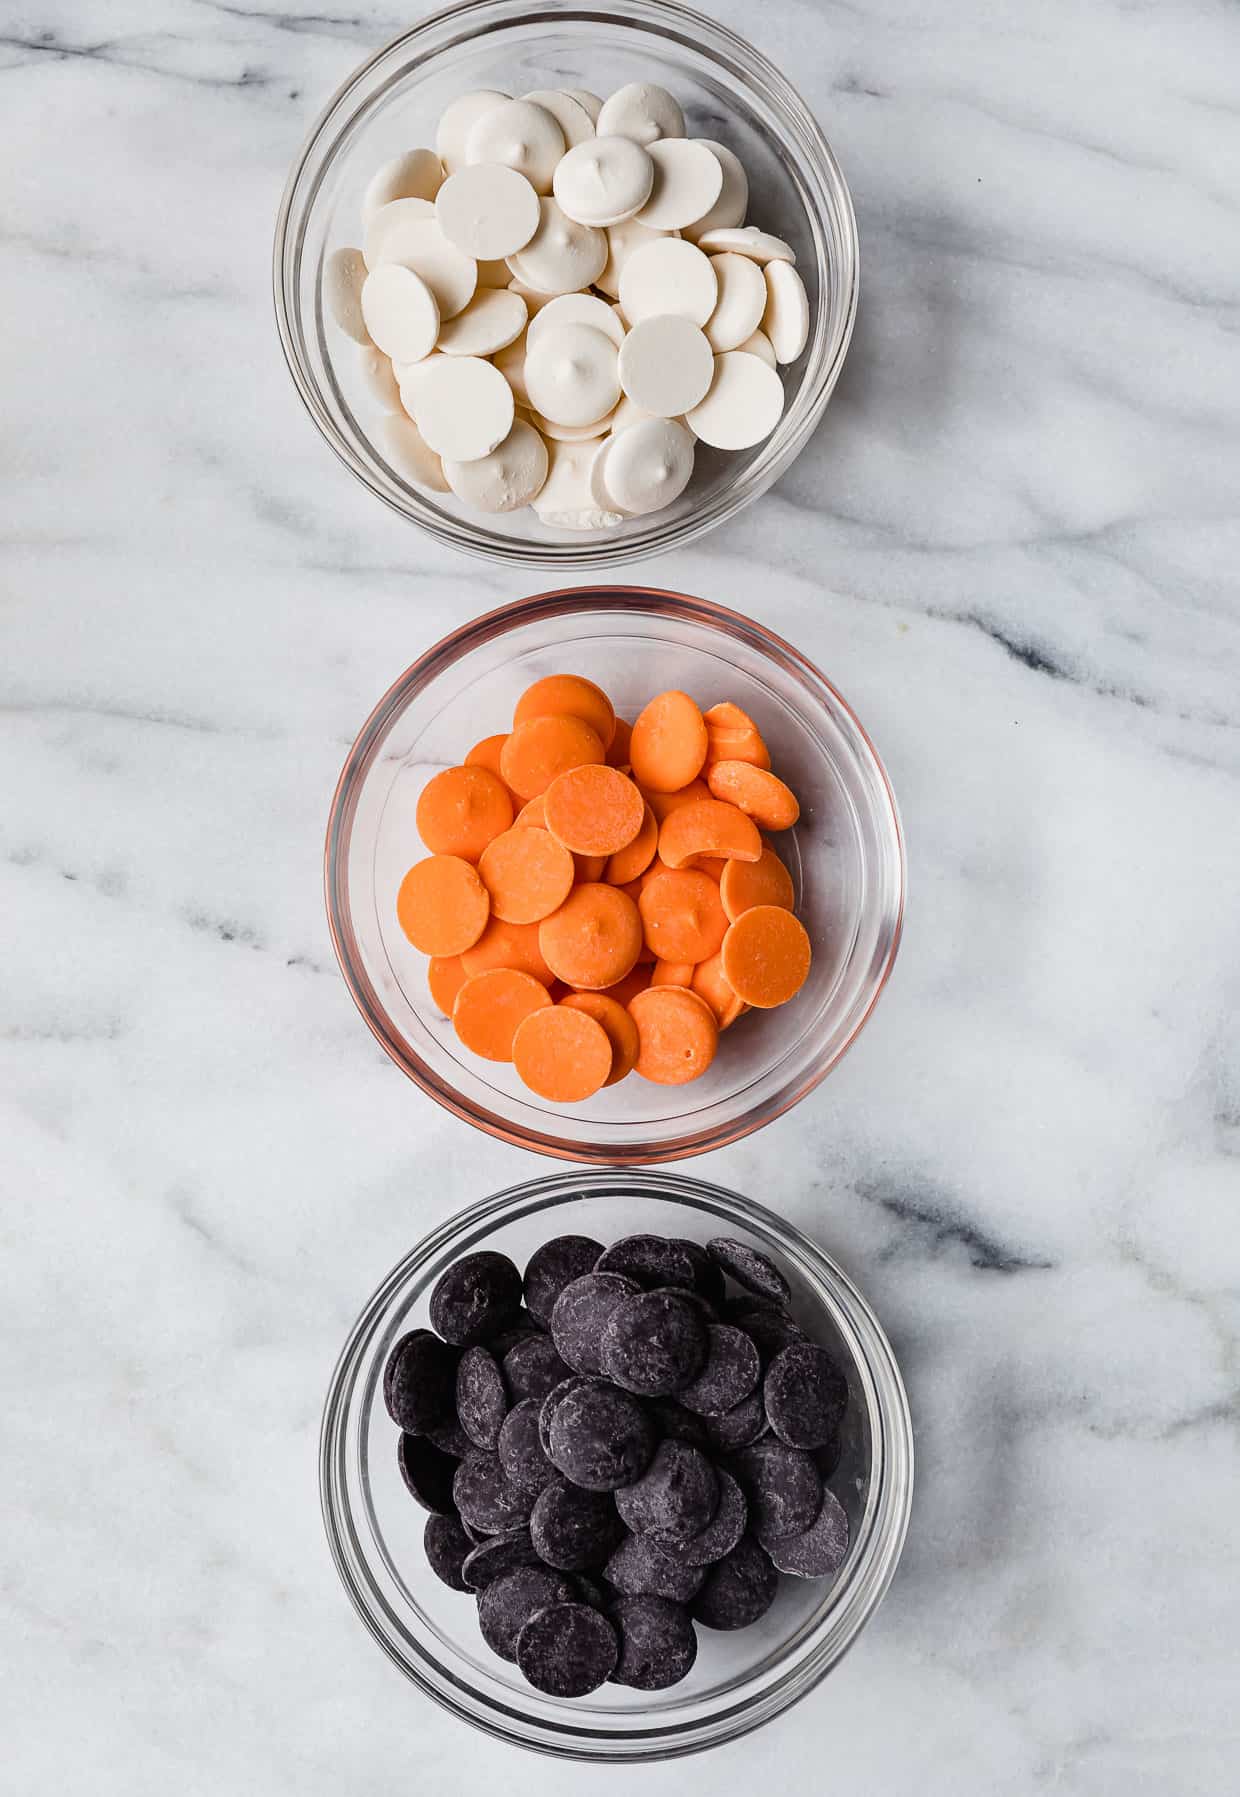 Three glass bowls filled with black, orange, and white melting chocolate disks on a white marble table.